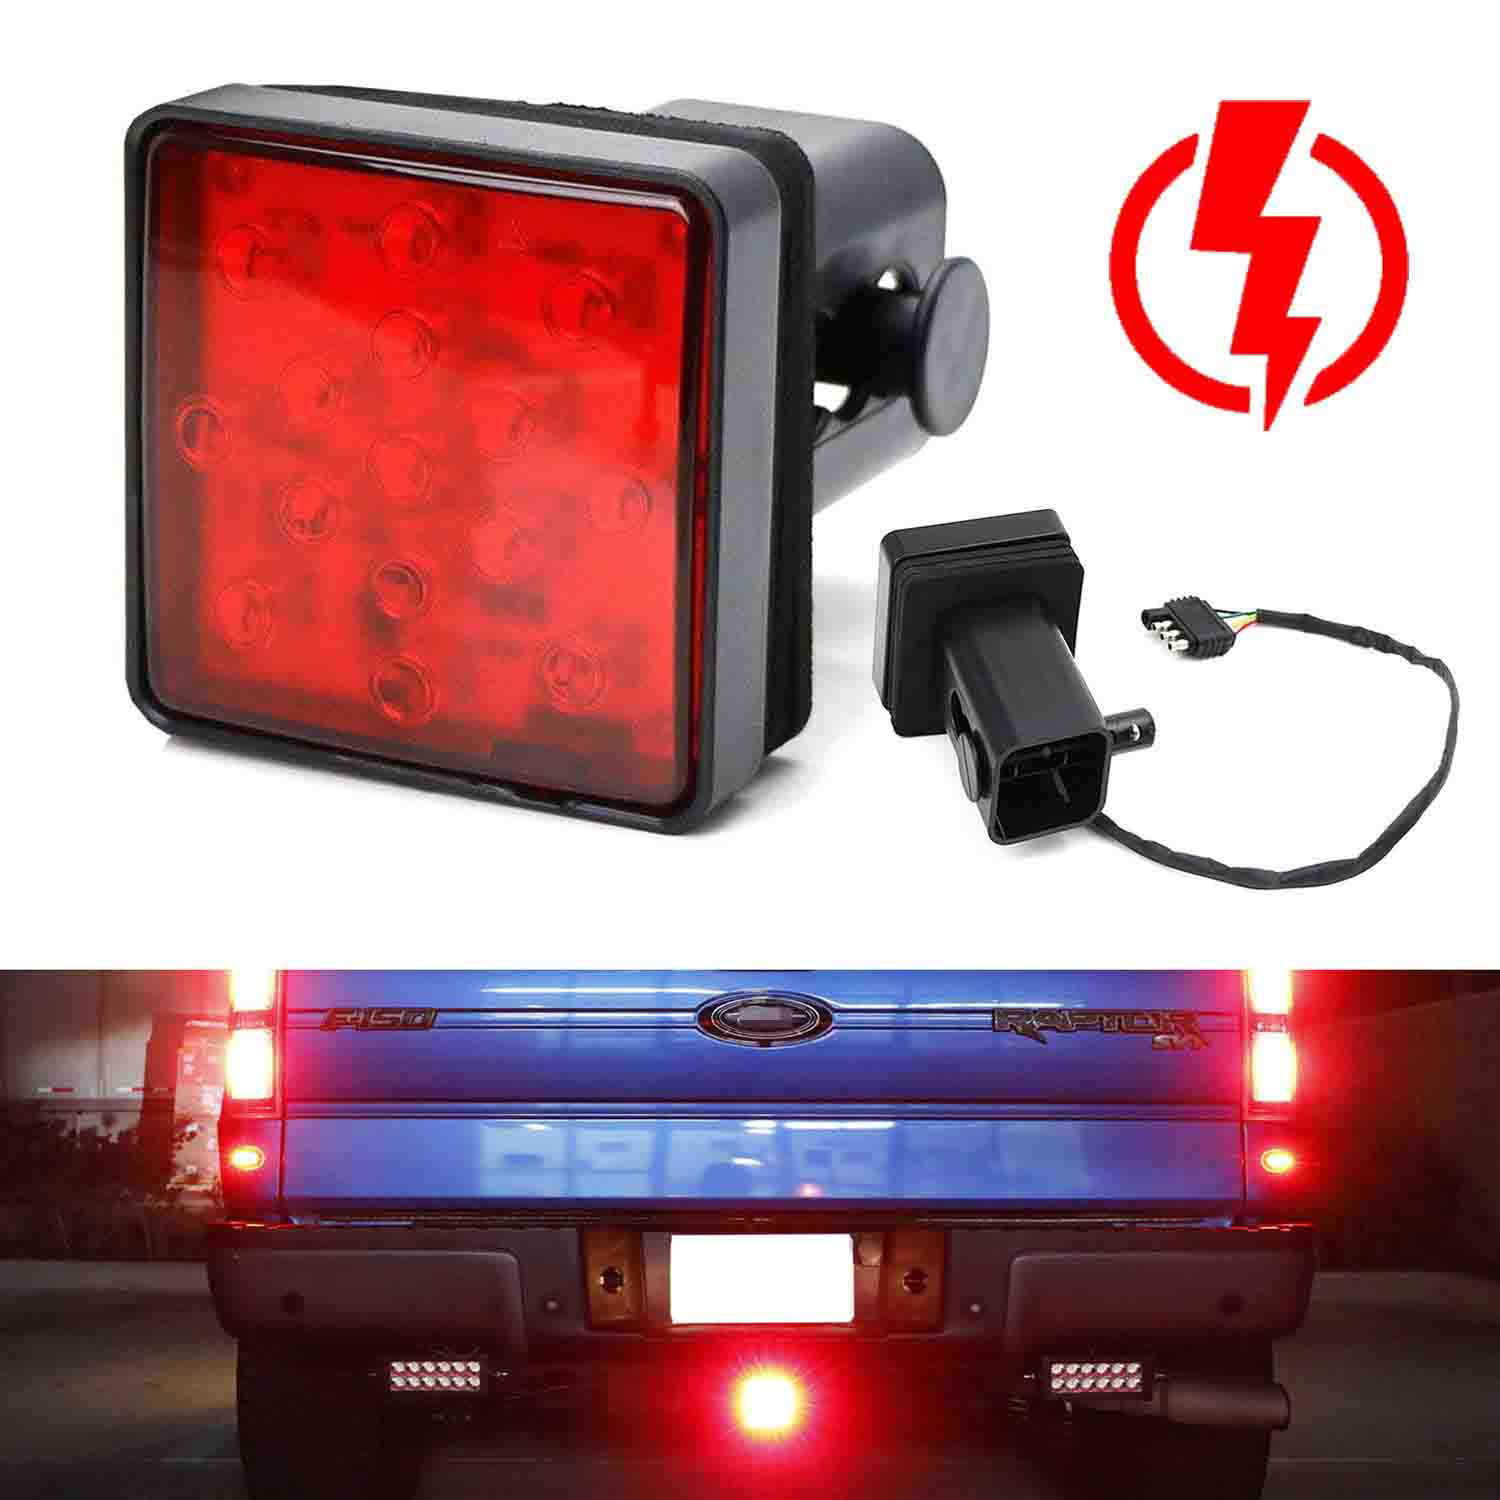 iJDMTOY Red Lens 15-LED Tow Hitch Receiver Brake Tail Light w/Strobe Feature Compatible with Truck SUV Trailer Equipped Class 3/4/5 2-Inch Towing Adapter Hole 